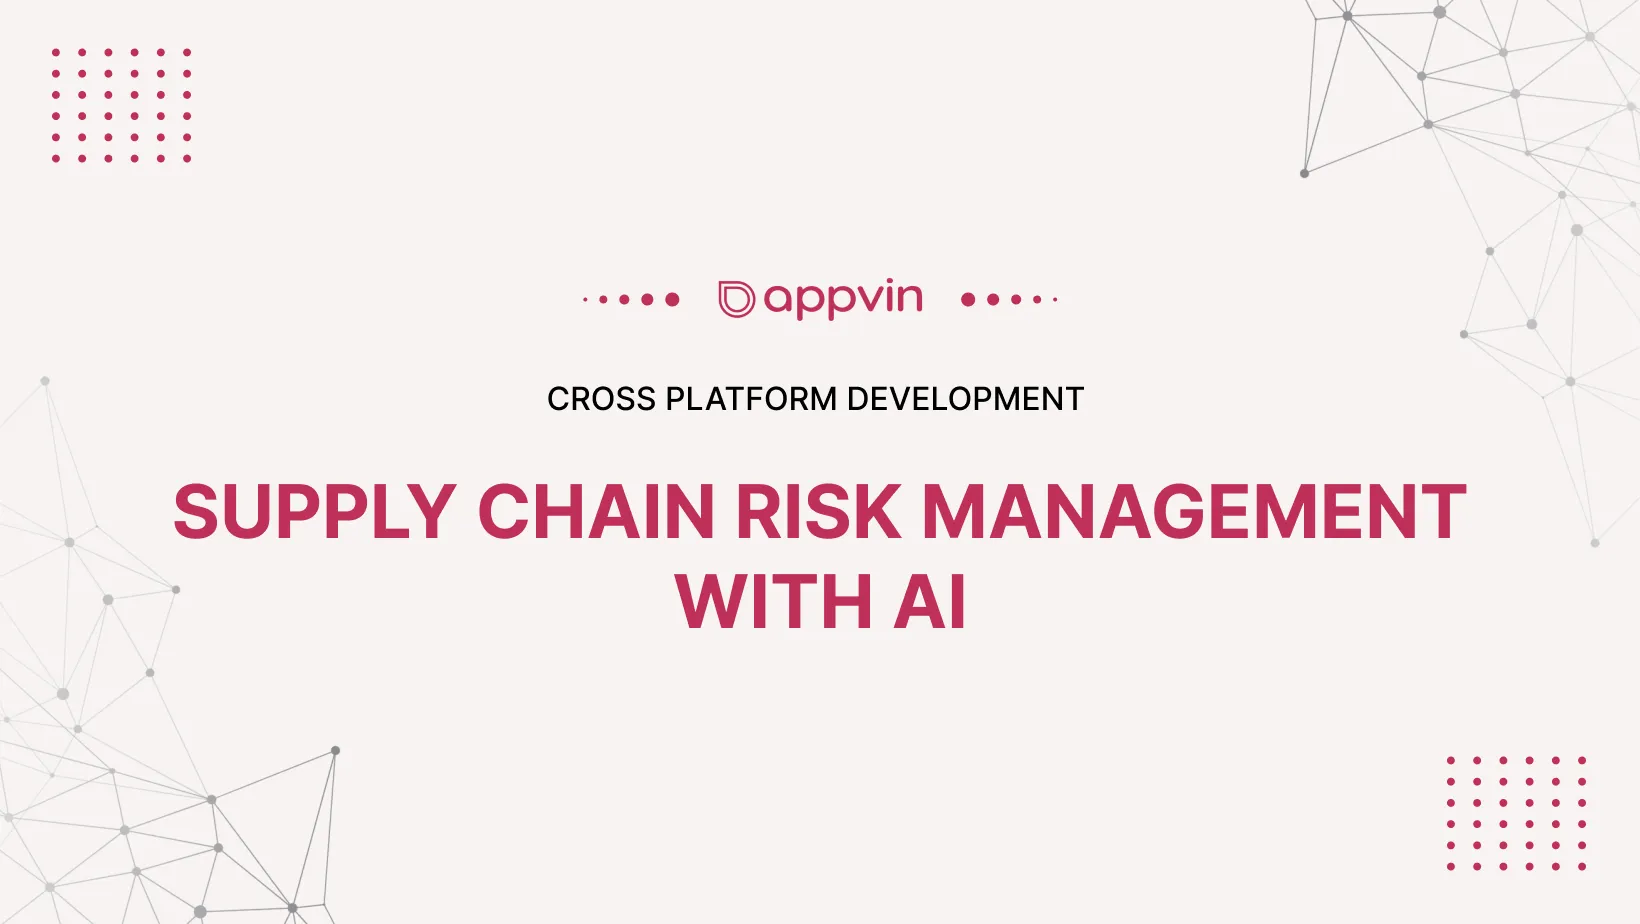 Supply Chain Risk Management with AI